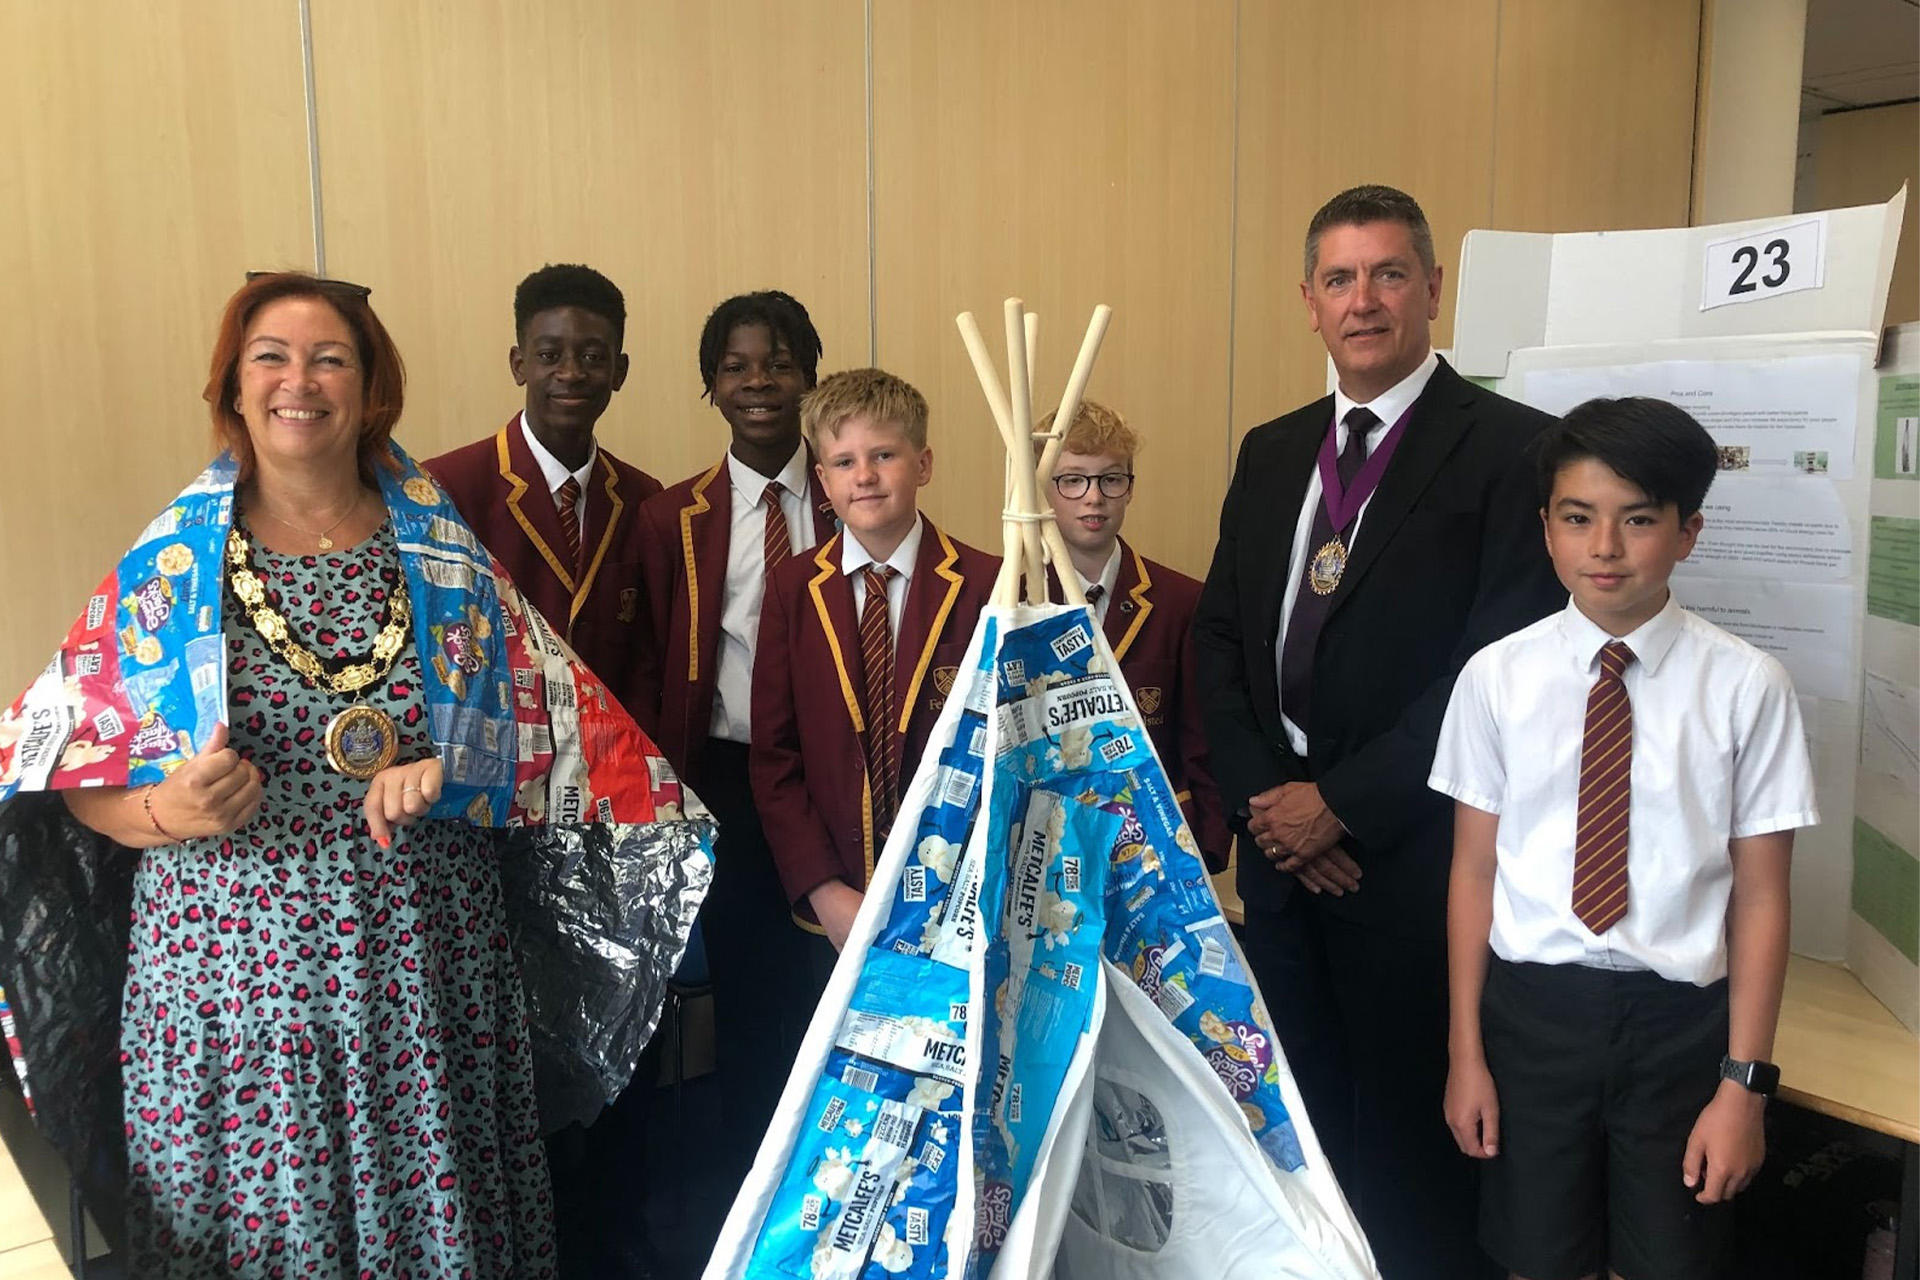 Felsted pupils with Mayor of Chelmsford, Linda Mascot and Ian Mascot: Recycled crisp packet tent and insulating blanket